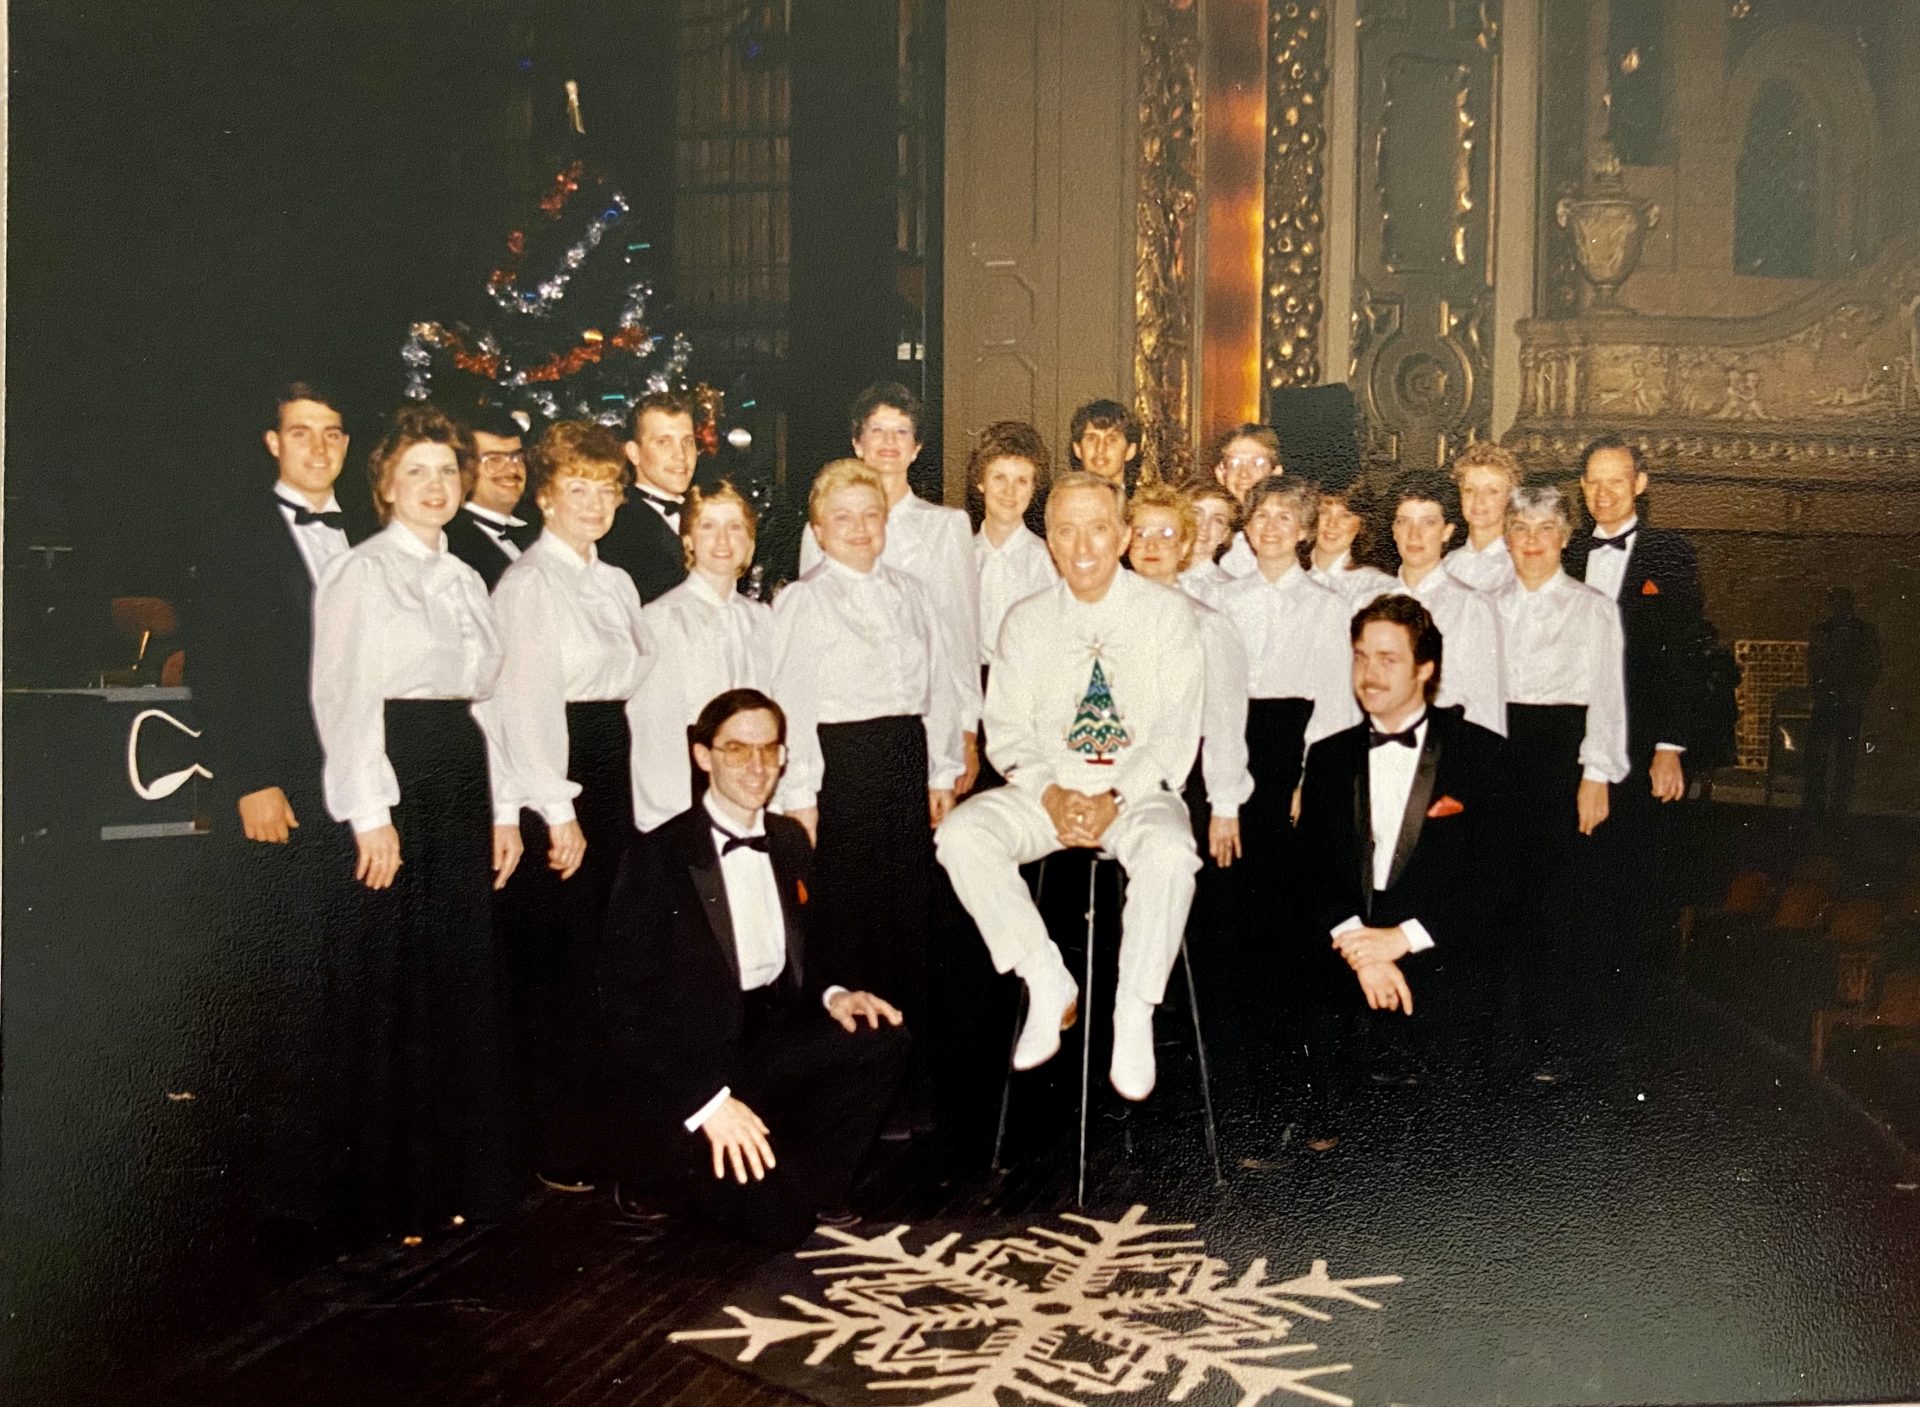 The Joliet Chamber Choir with Andy Williams - Ann is right behind him in the photo.